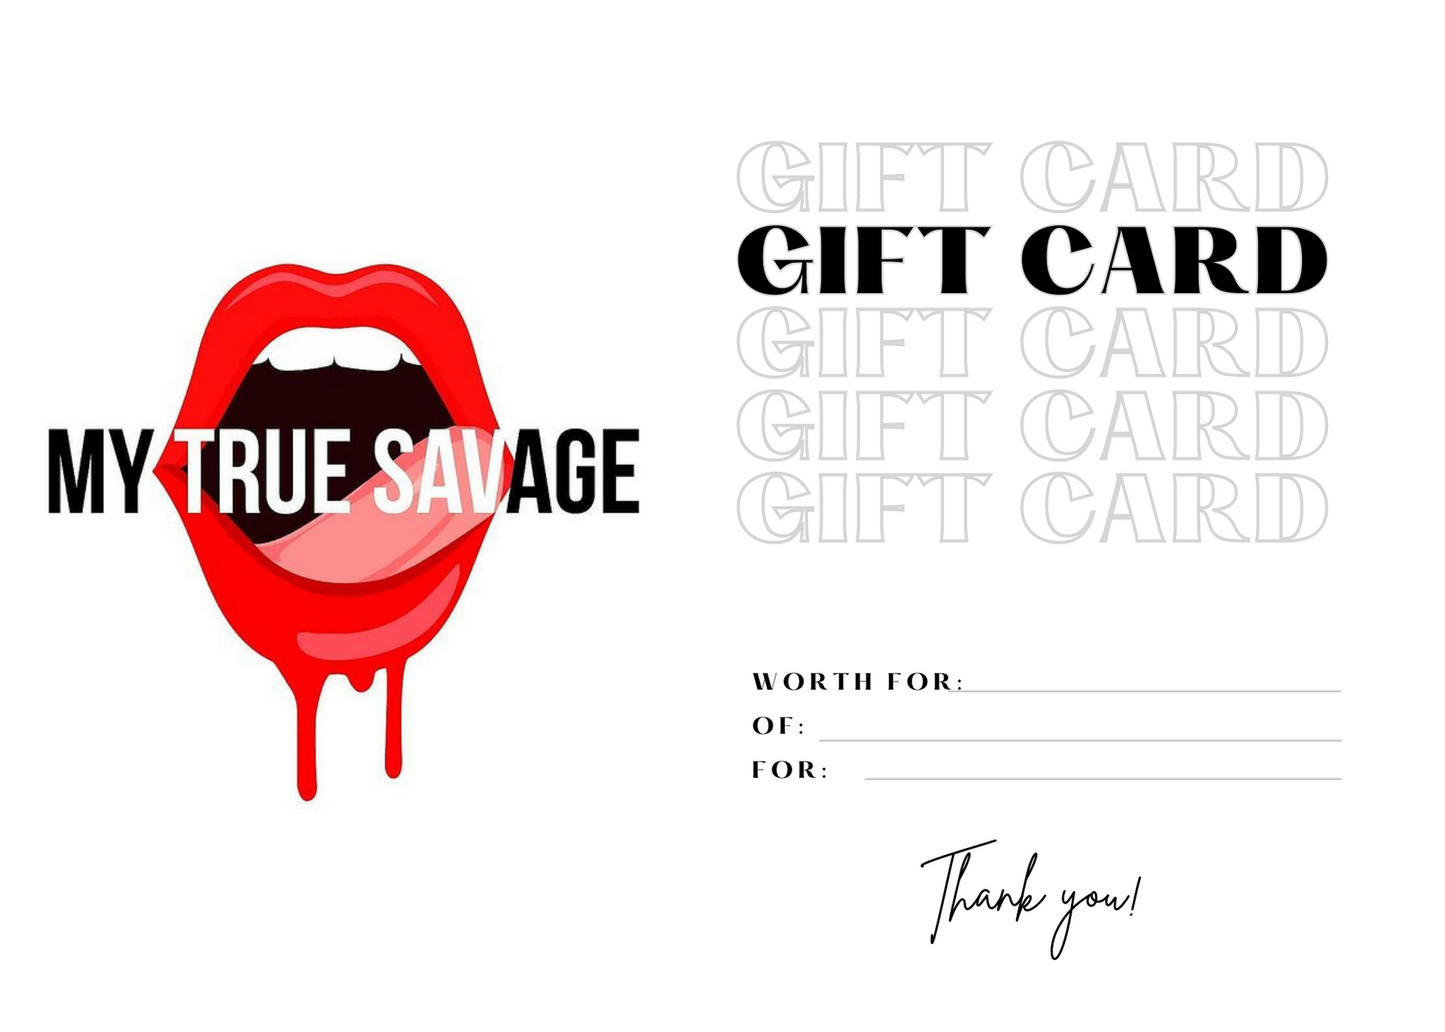 My True Savage Co Gift Card